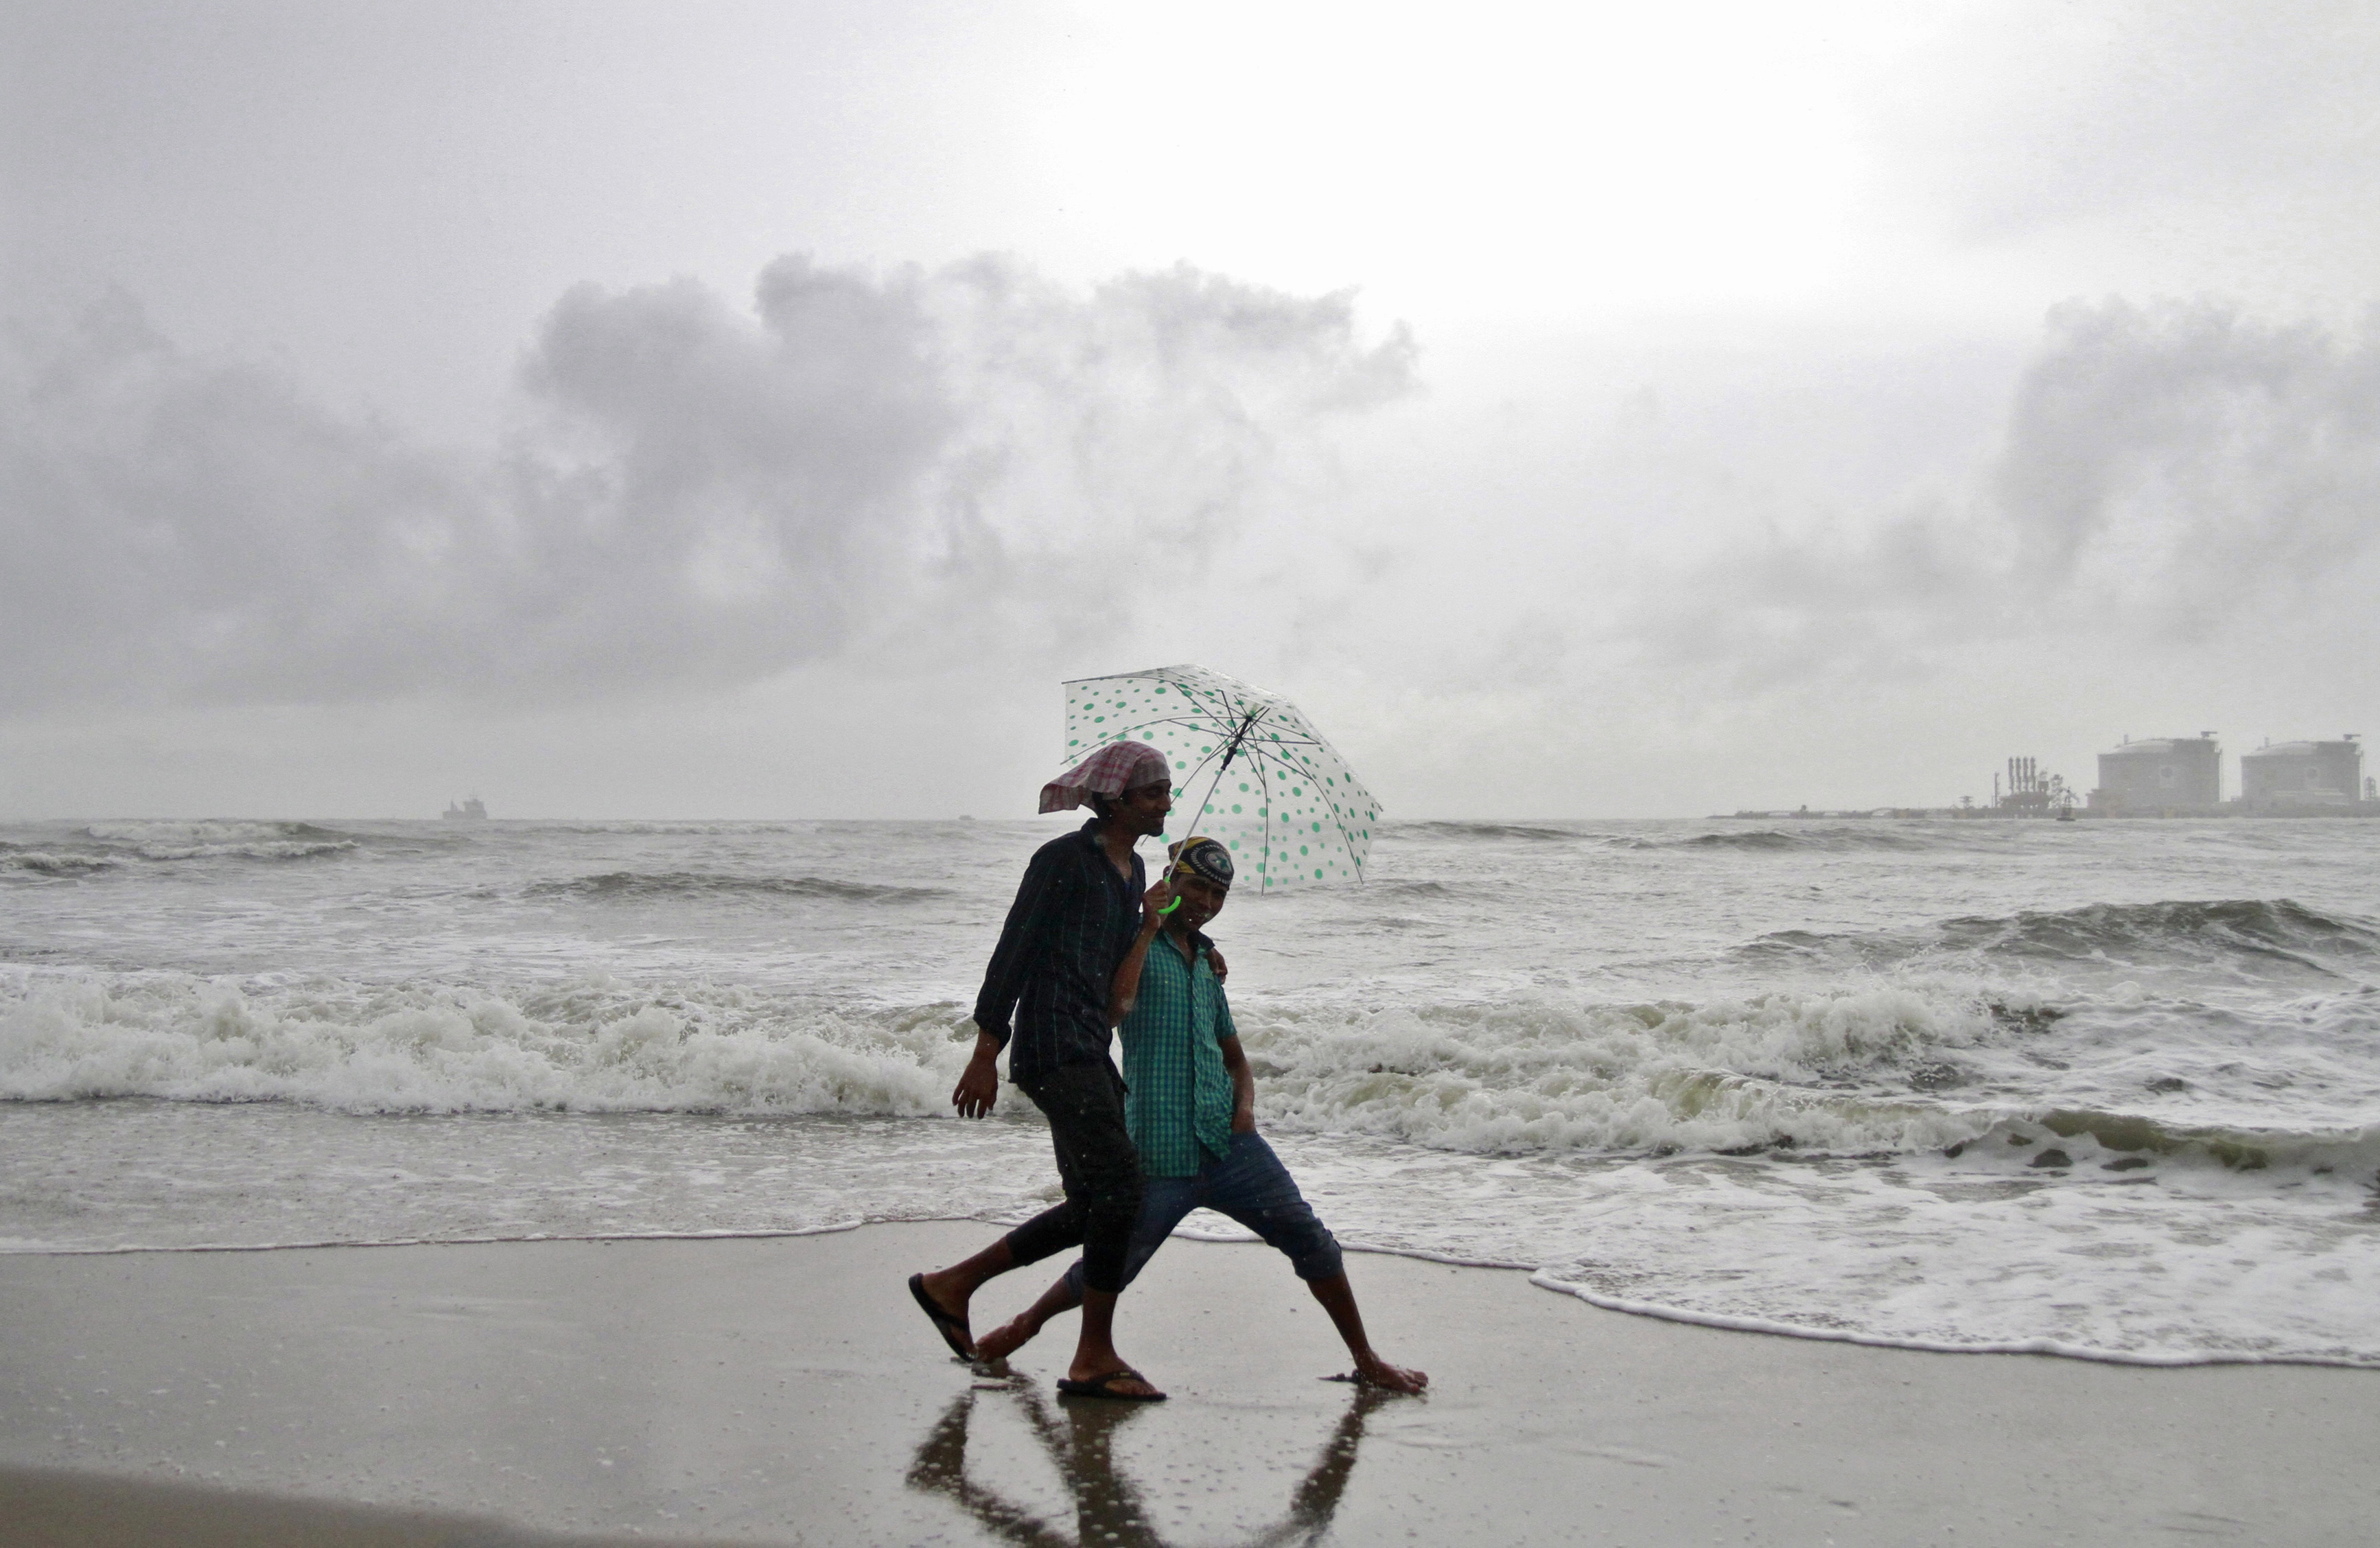 Beachgoers react to the camera while holding an umbrella as it drizzles at the Fort Kochi beach in Kochi